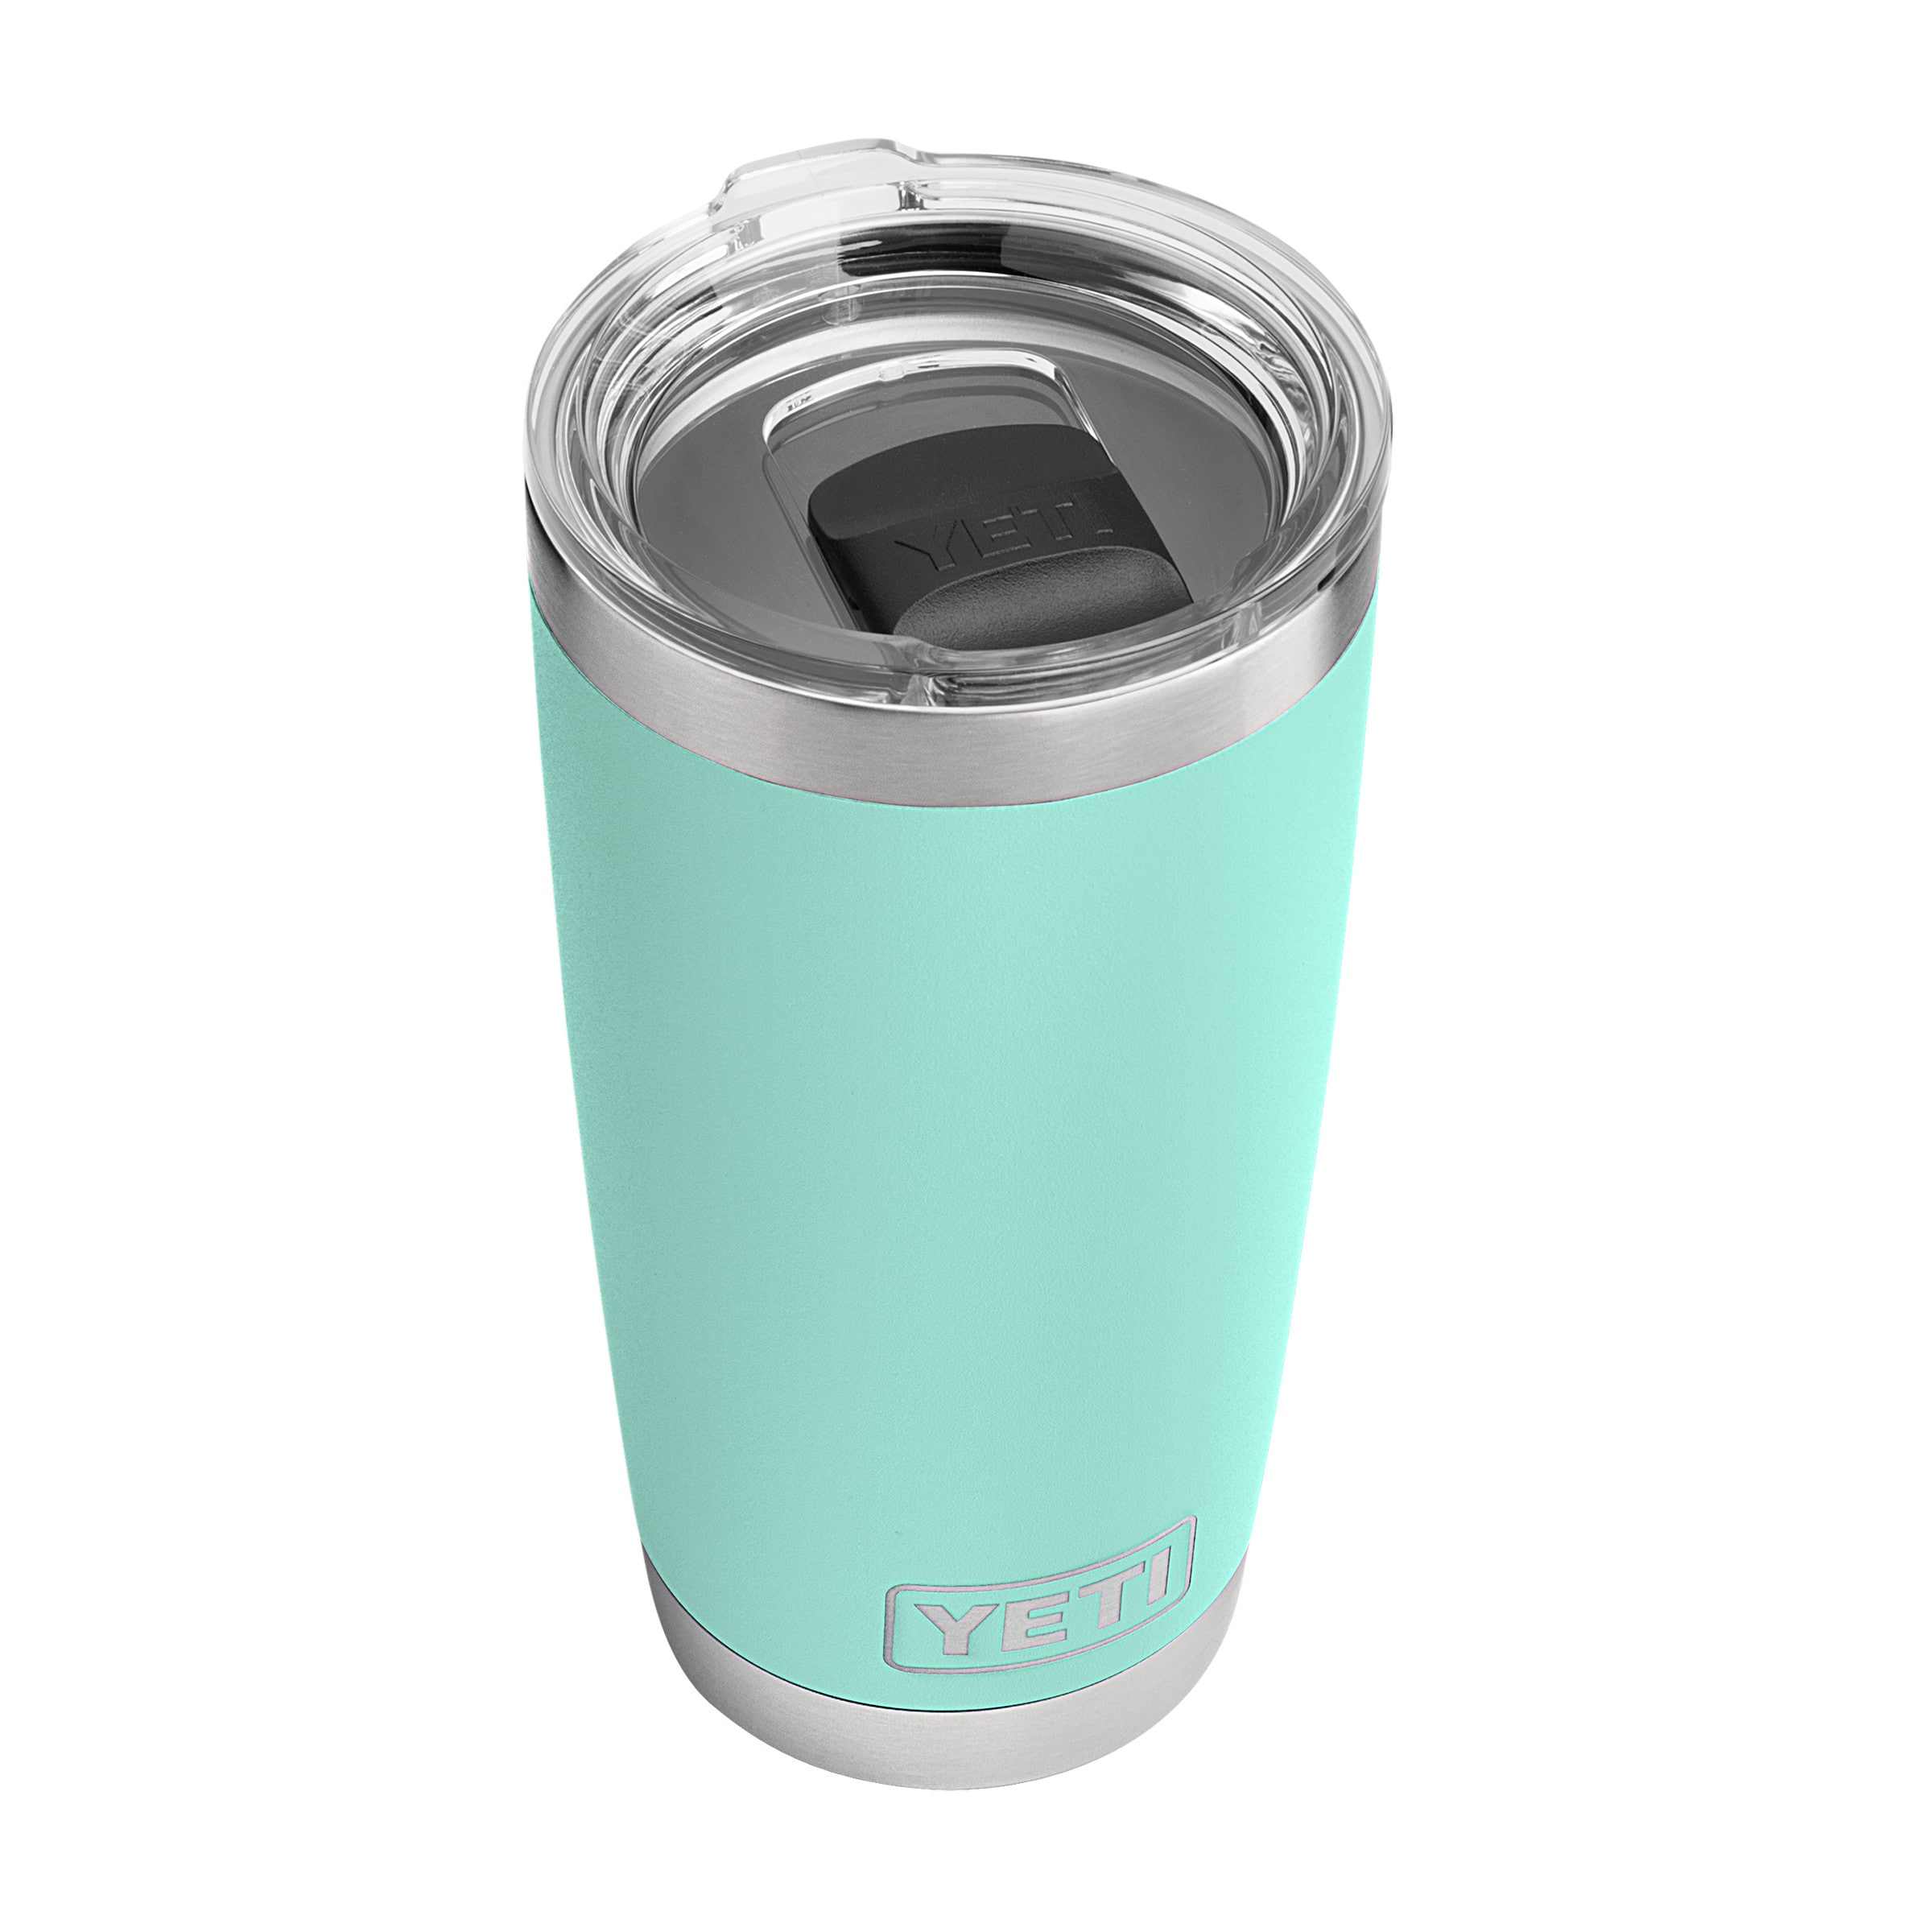 Shop Drinkware & Coffee YETI RAMBLER 20 OZ TUMBLER - GRANITE GRAY on - Get  Up To 70% Off - Just Another Fisherman Sales 